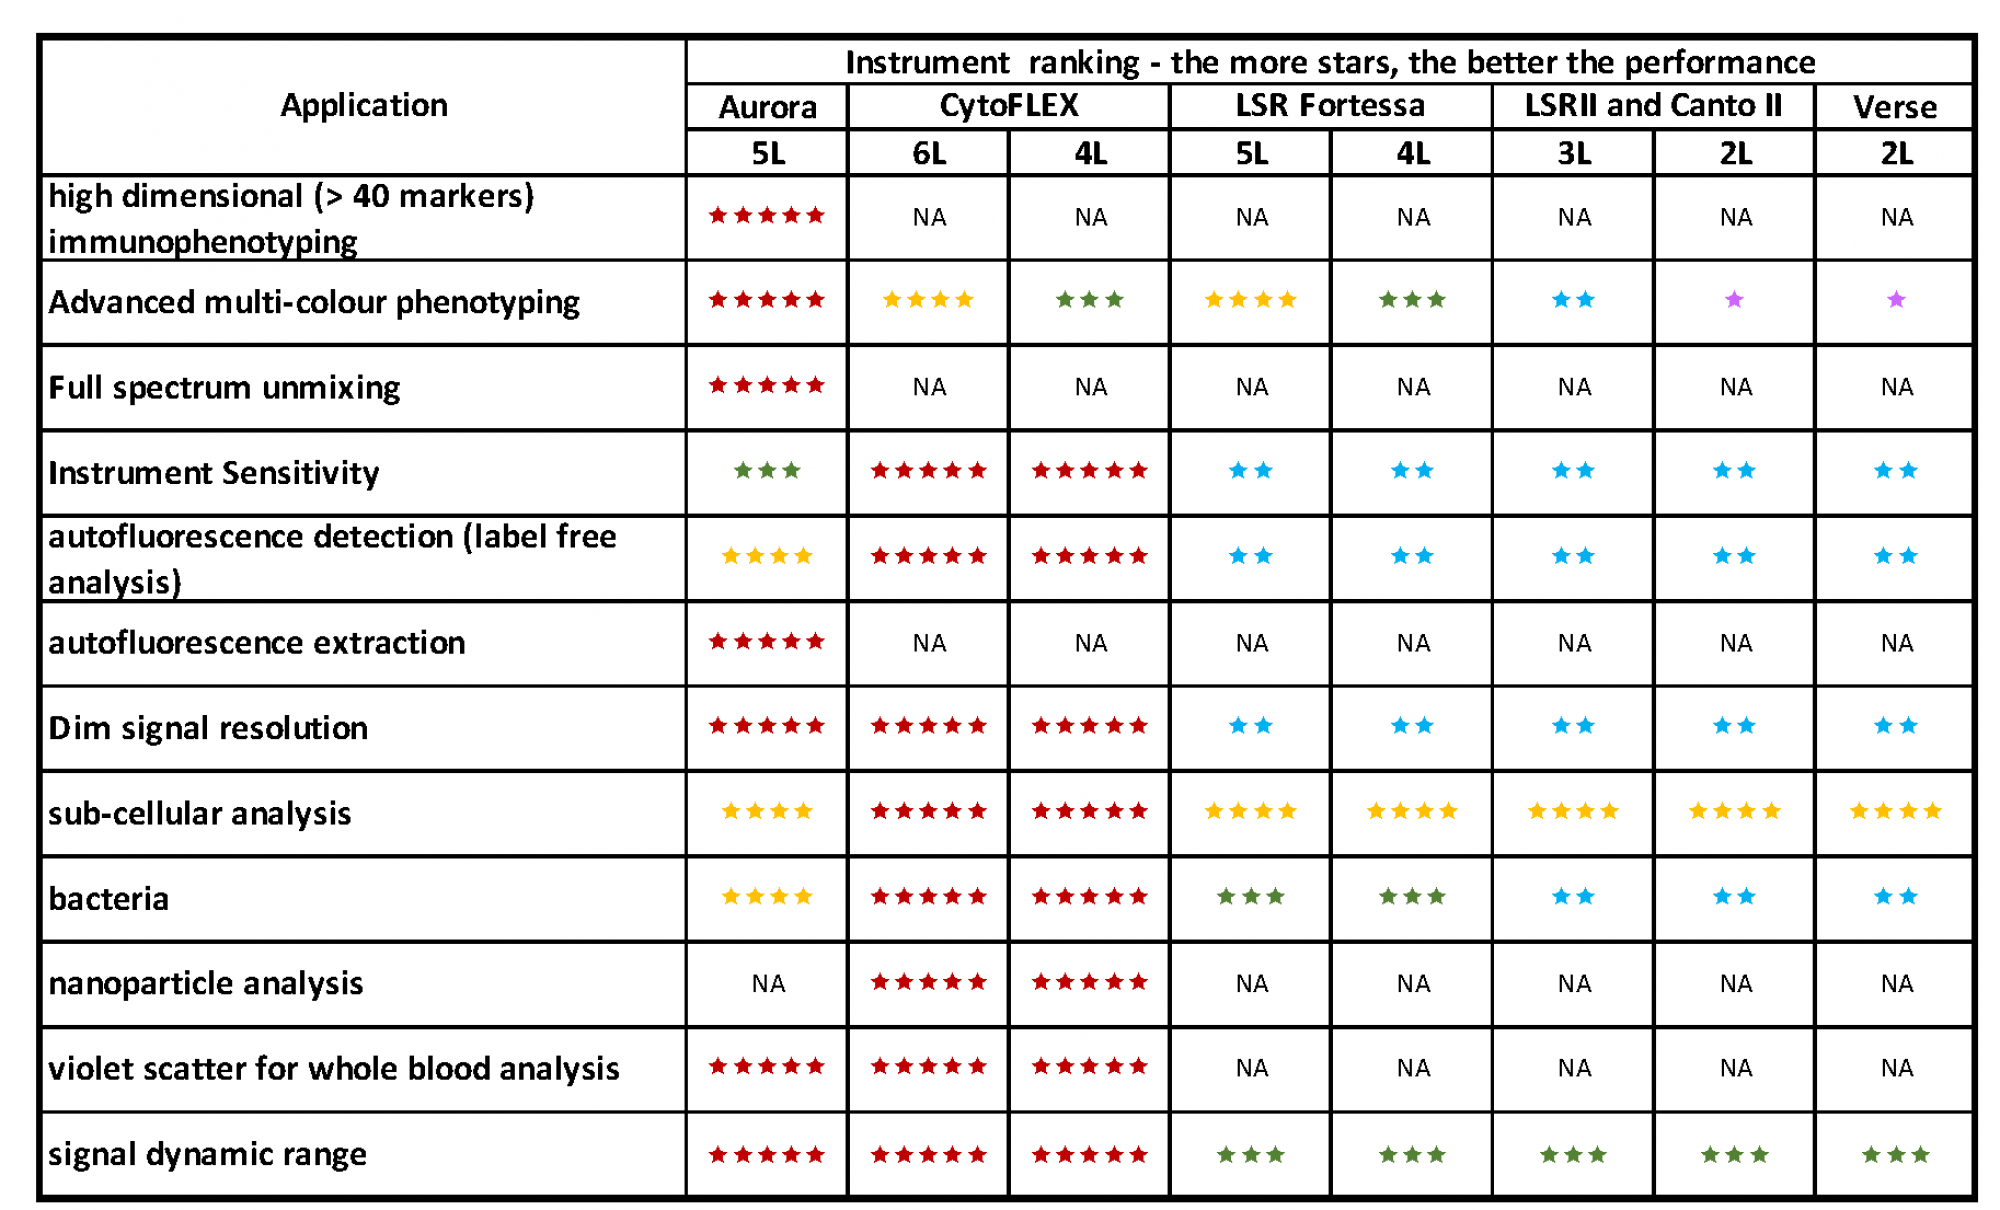 analyser application ratings